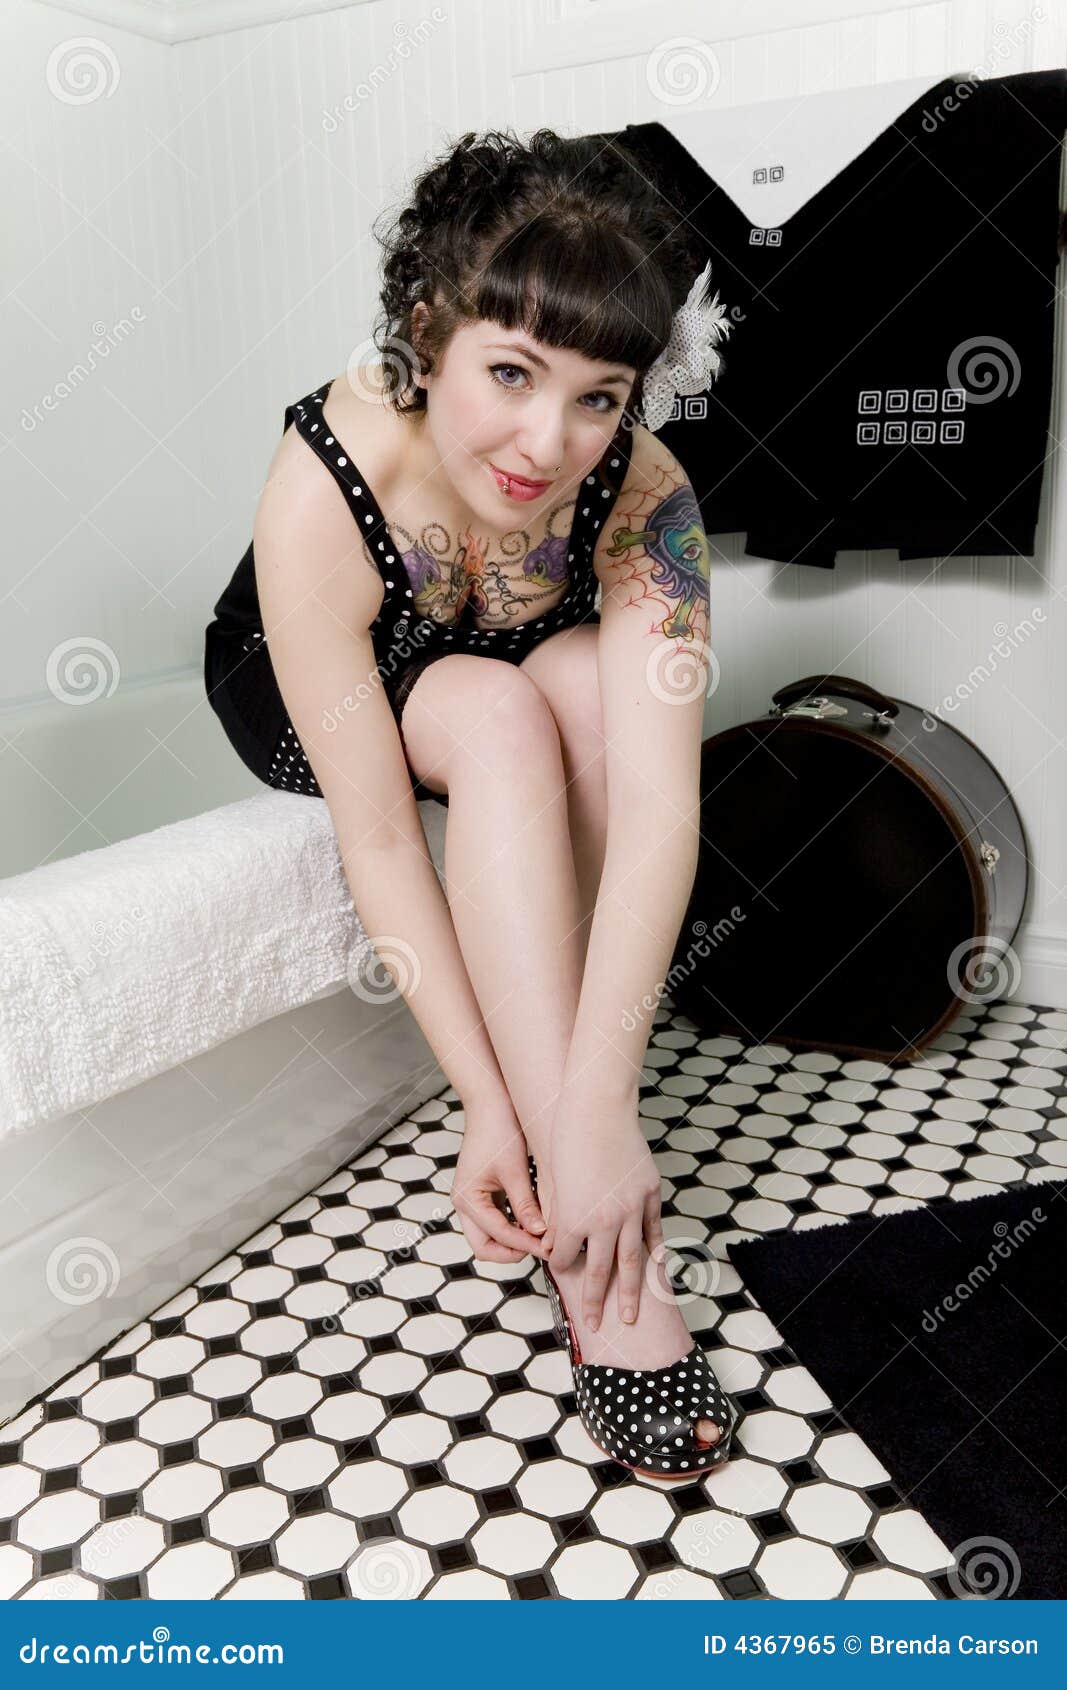 886 Rockabilly Pinup Girl Photos - Free & Royalty-Free Stock Photos from  Dreamstime